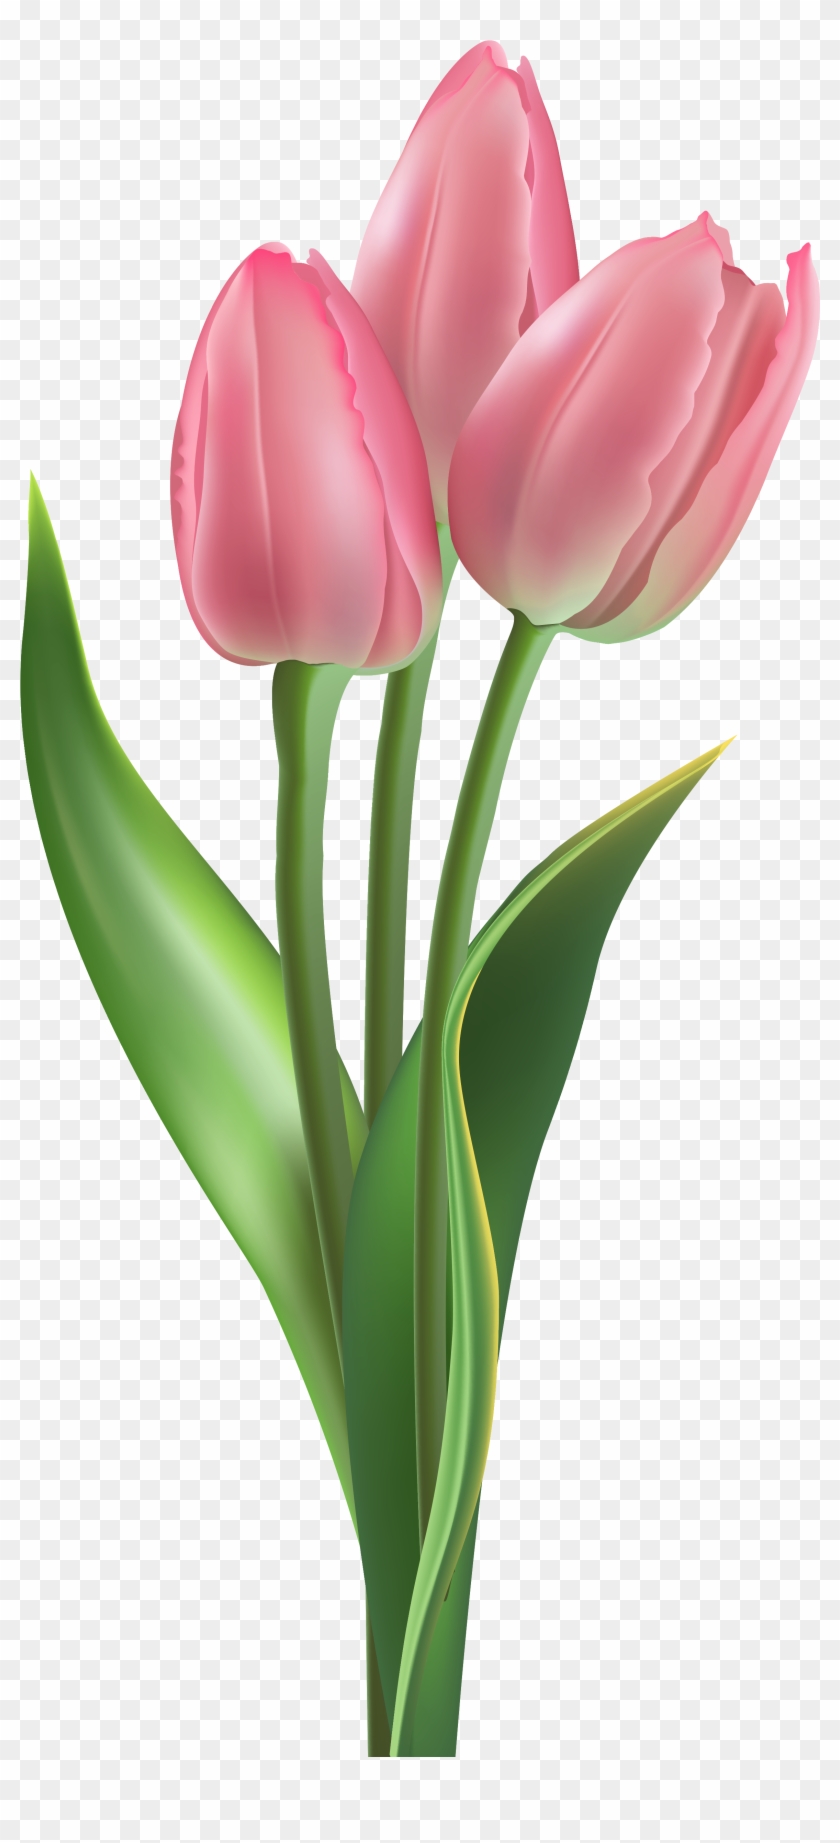 Soft Pink Tulips Png Clipart Image - Soft Pink Pink Tulips #216736